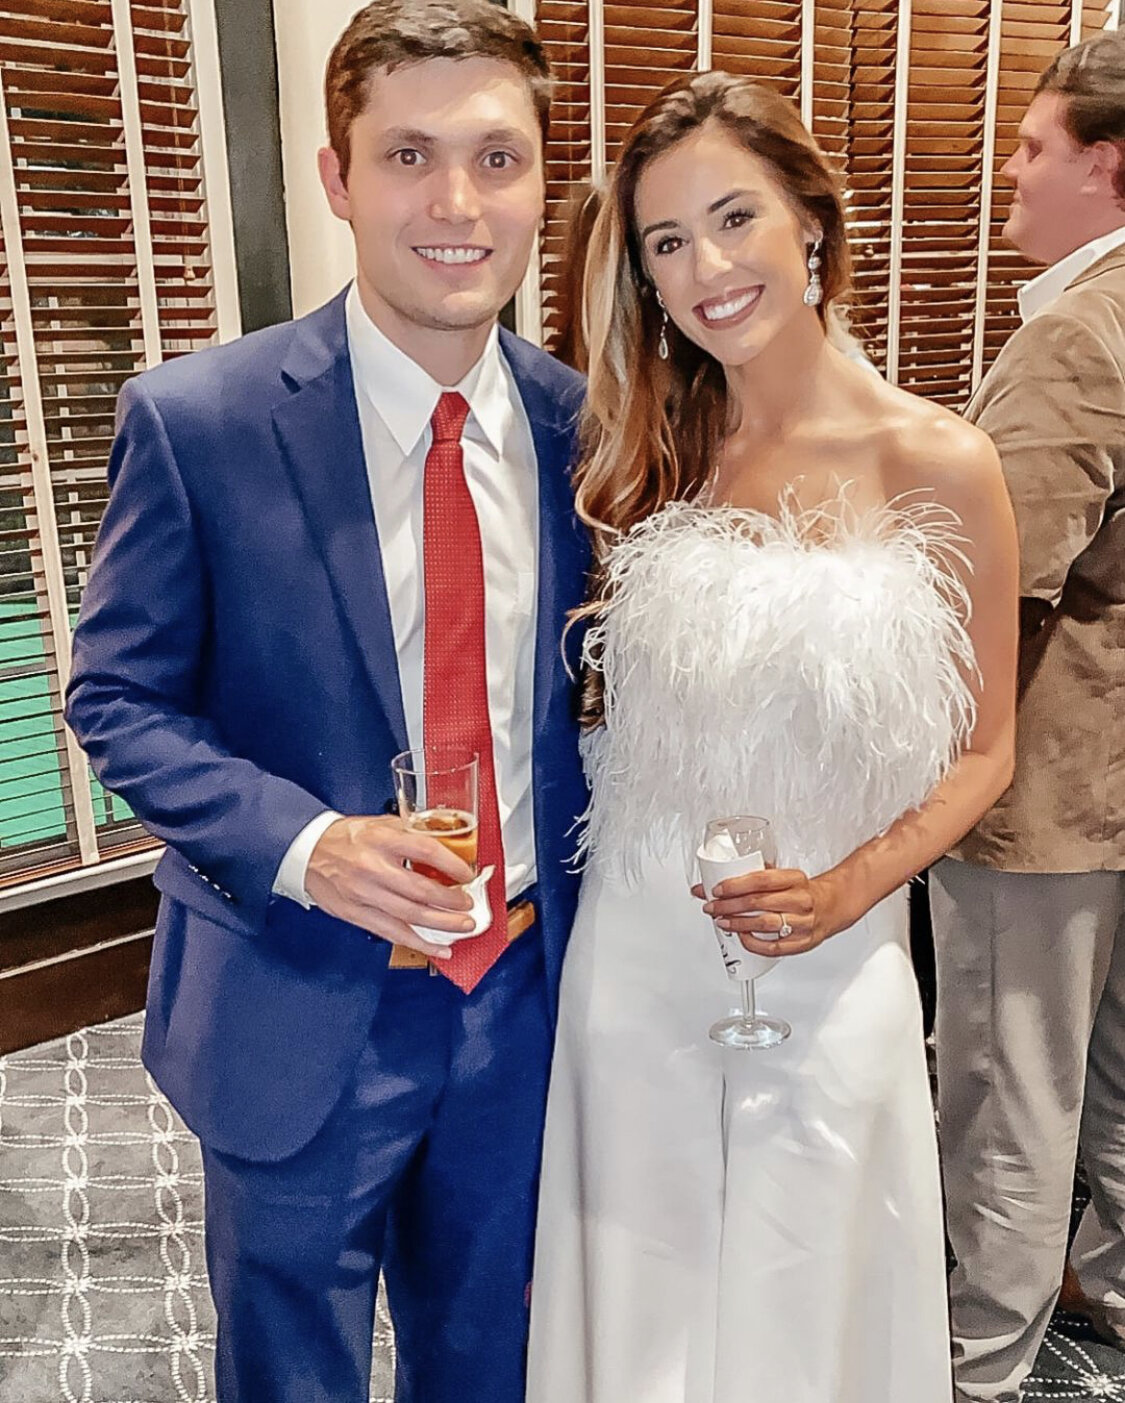 Our Engagement Party (Columbus, MS) - I fell in love with this jumpsuit and knew I had to wear it to something!  My mom actually found it at the Bride and Groom in my hometown and sent me a pic because she knew it was one of those rare items  I’d be obsessed with! I also really love this one that is a little more affordable and almost identical.